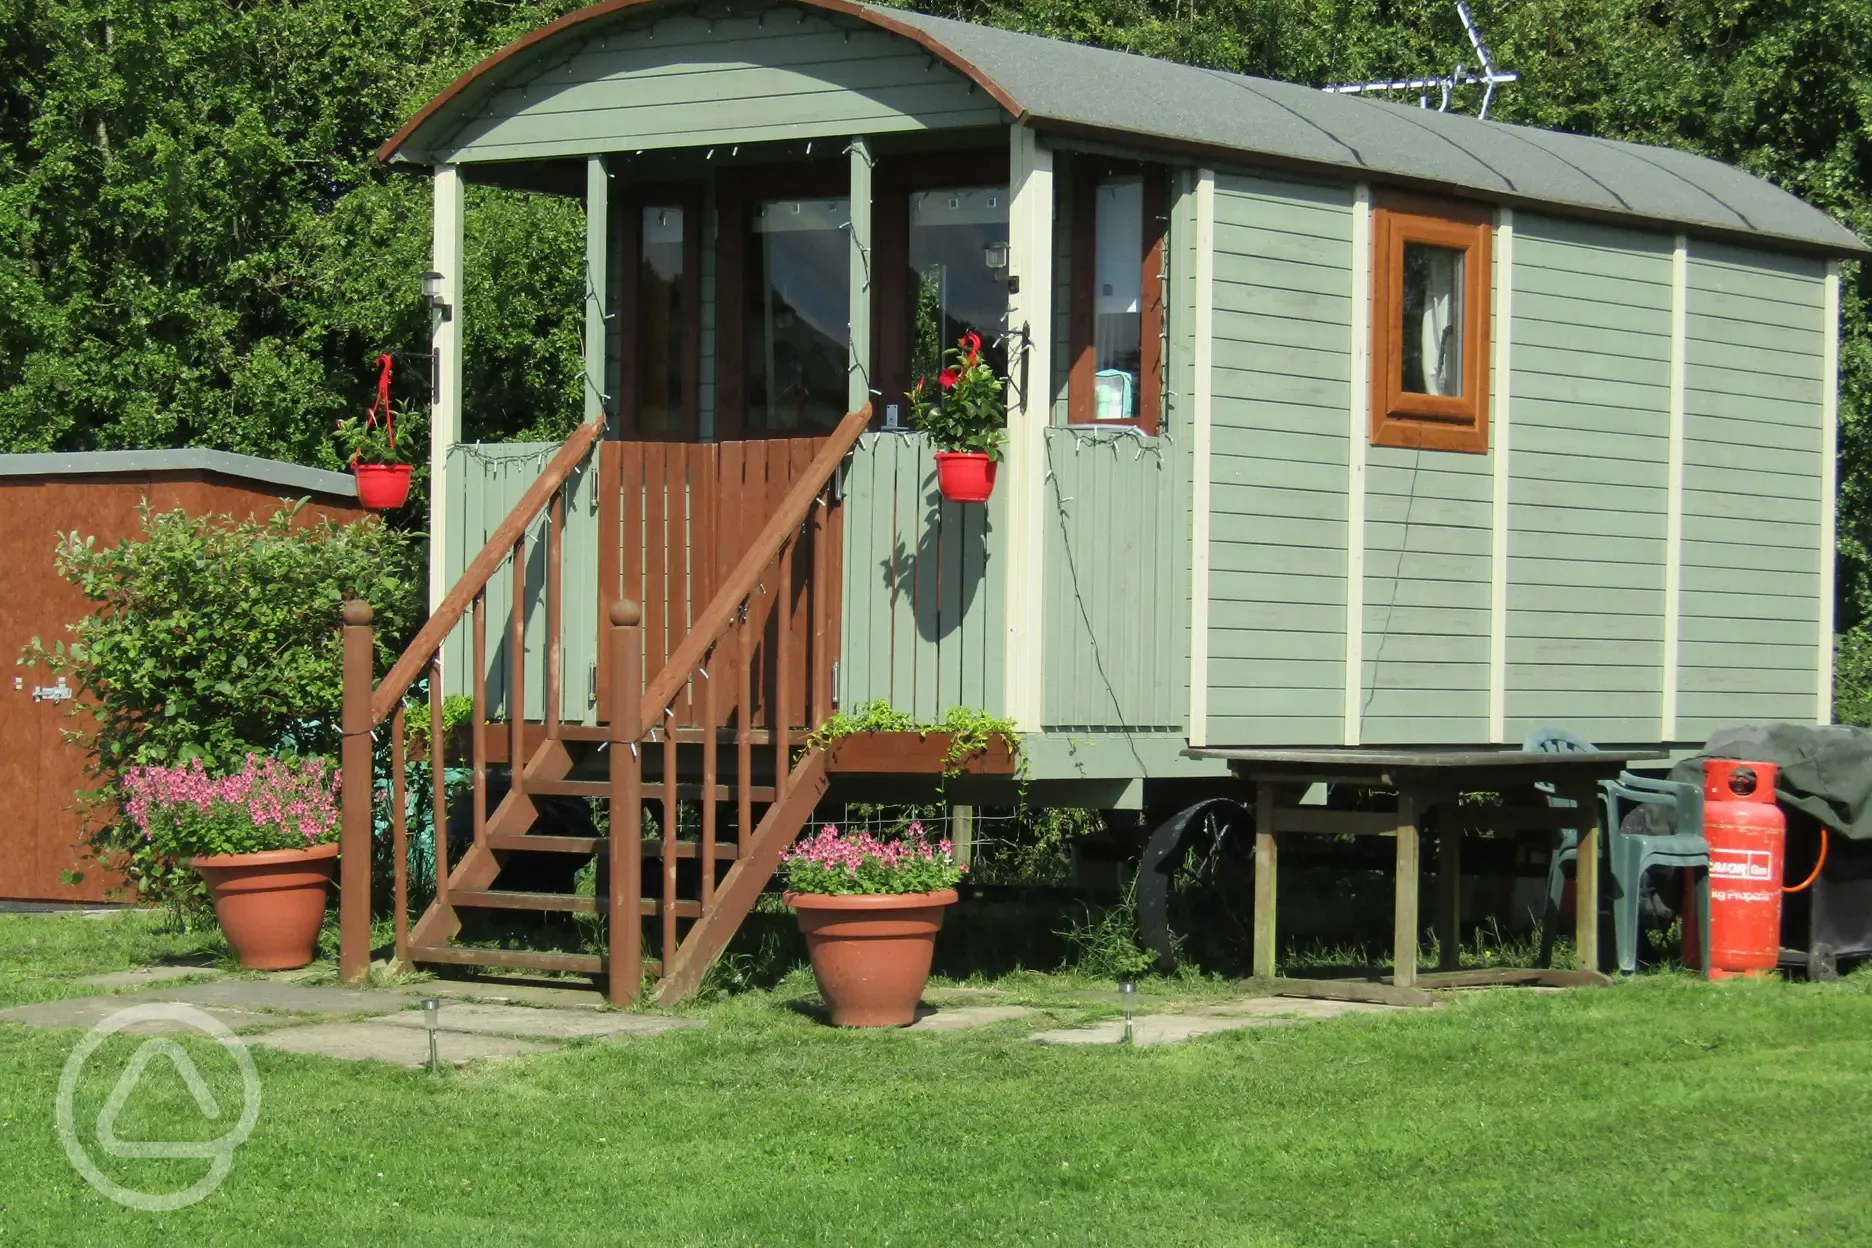 Our beautifully appointed Shepherd's Hut